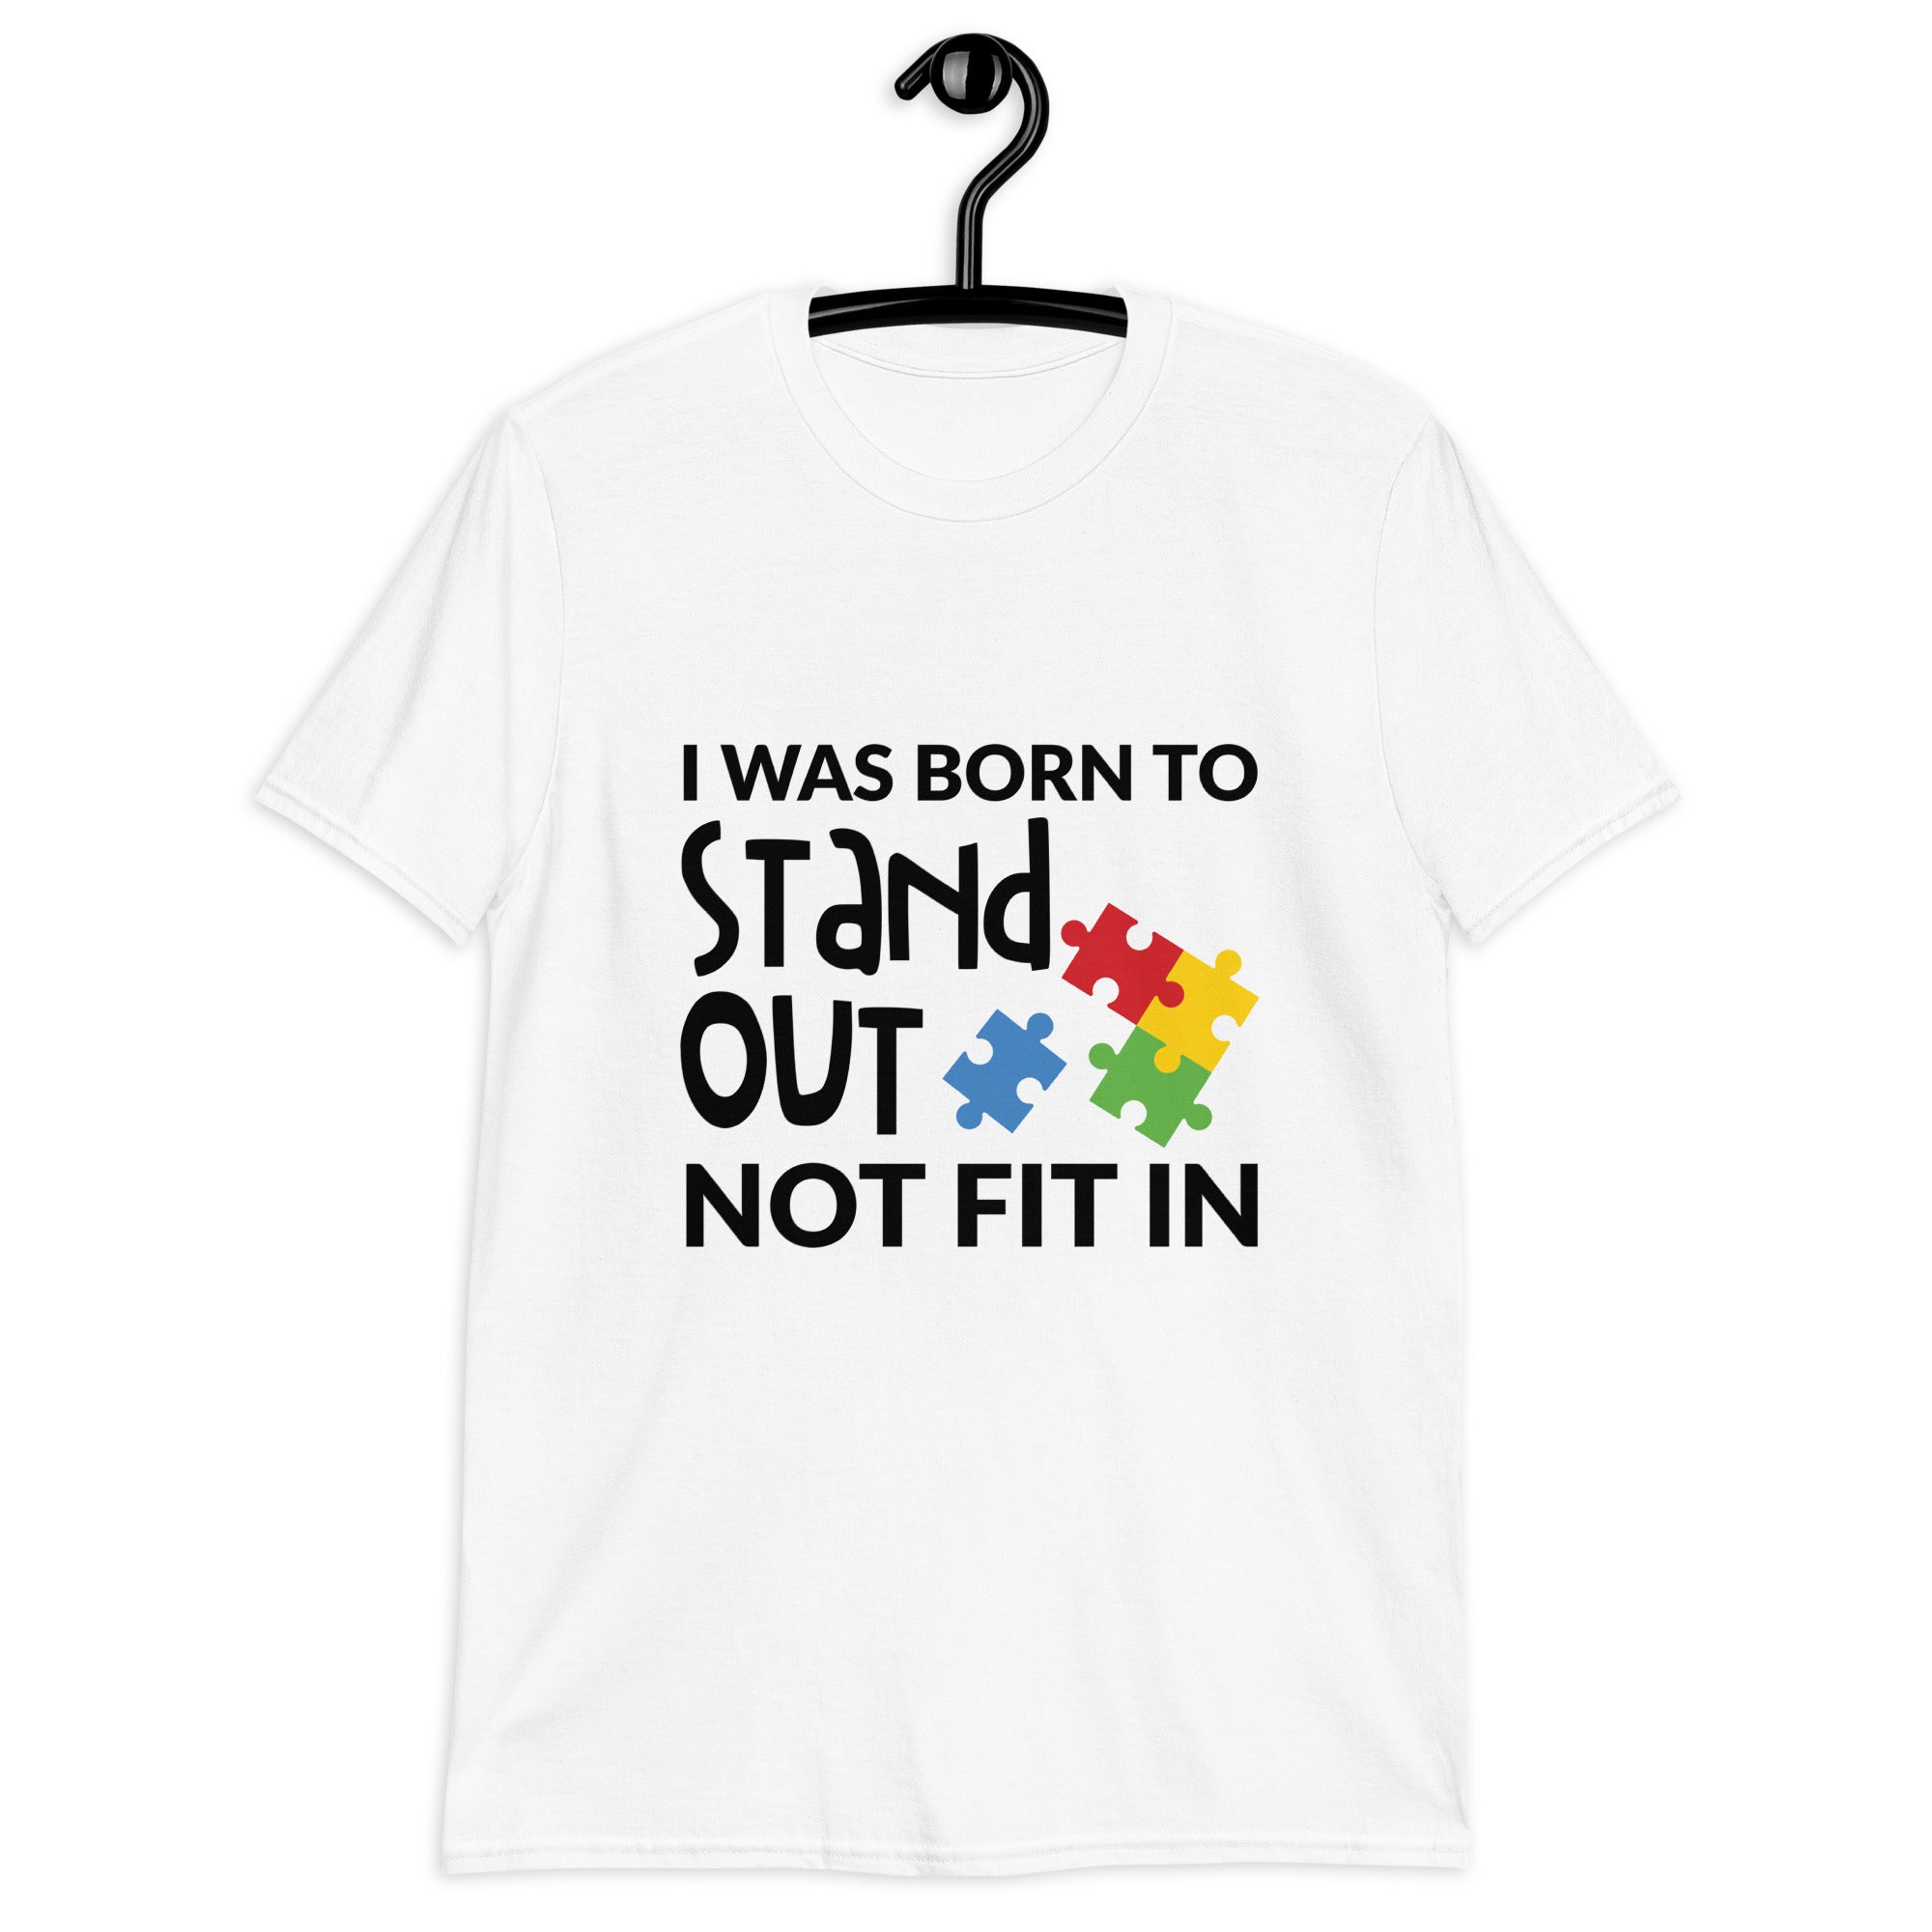 Short-Sleeve Unisex T-Shirt- I was born to stand out not fit in